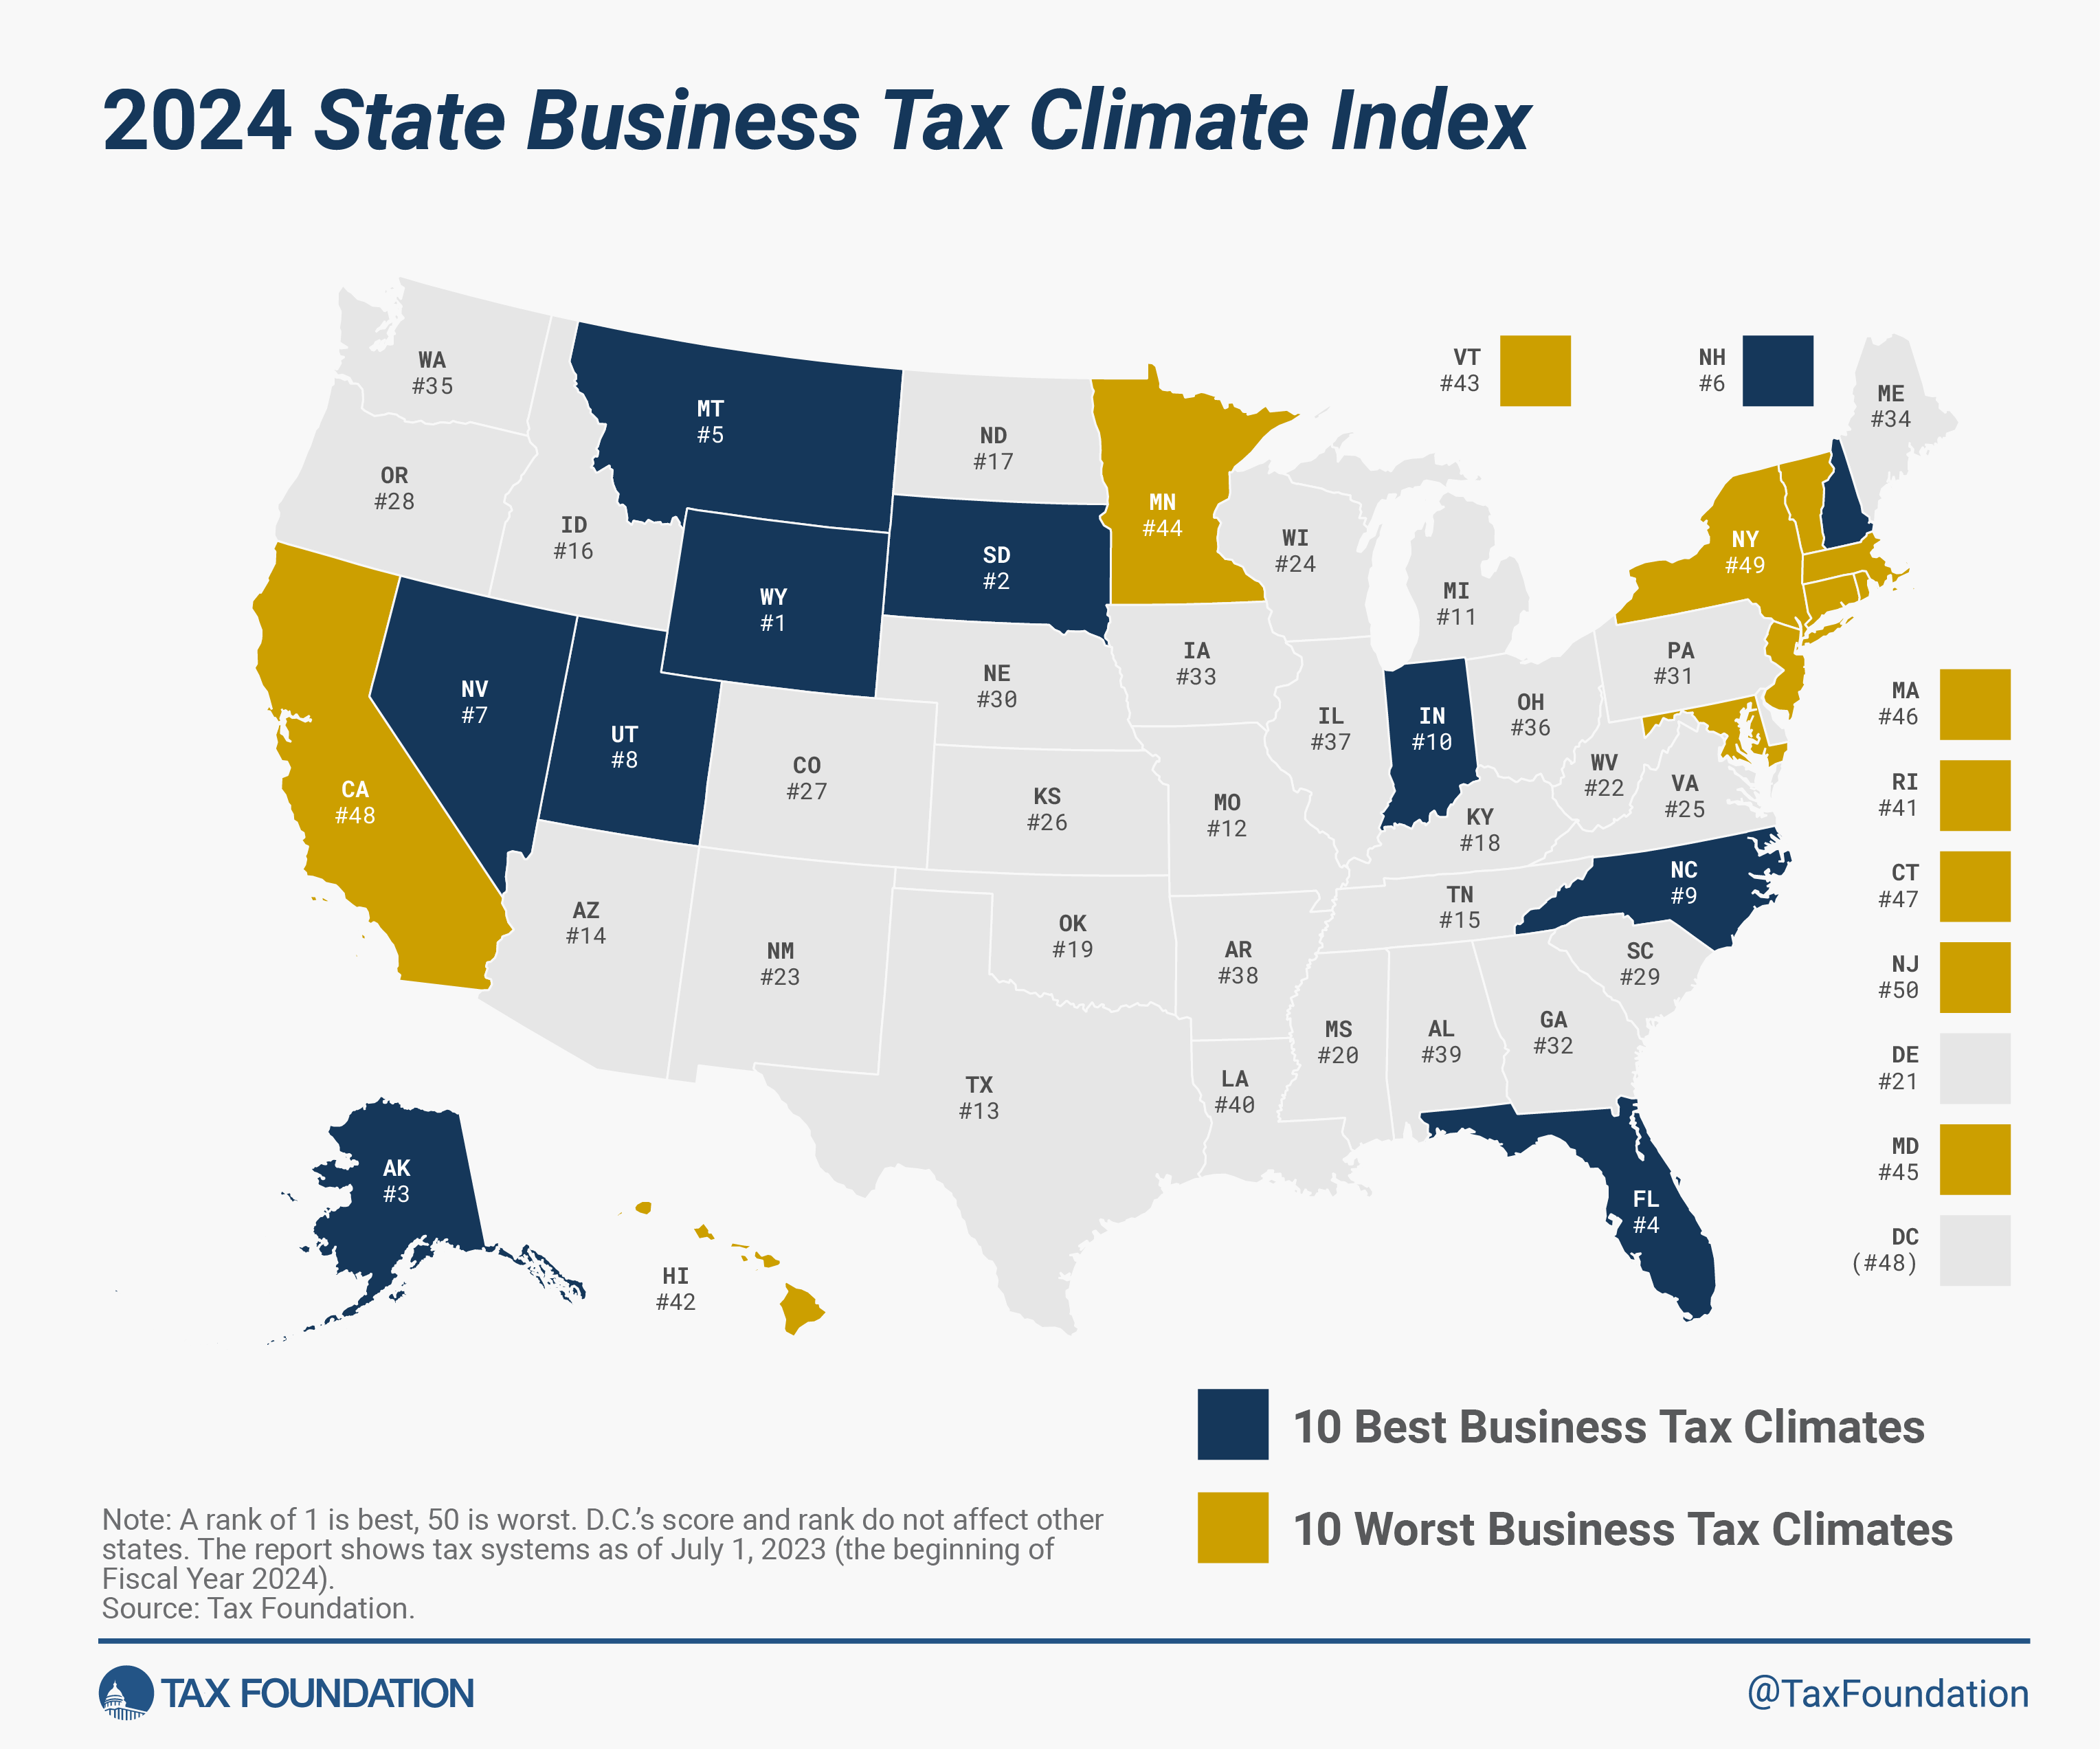 2024 State Business Tax Climate Index Rankings